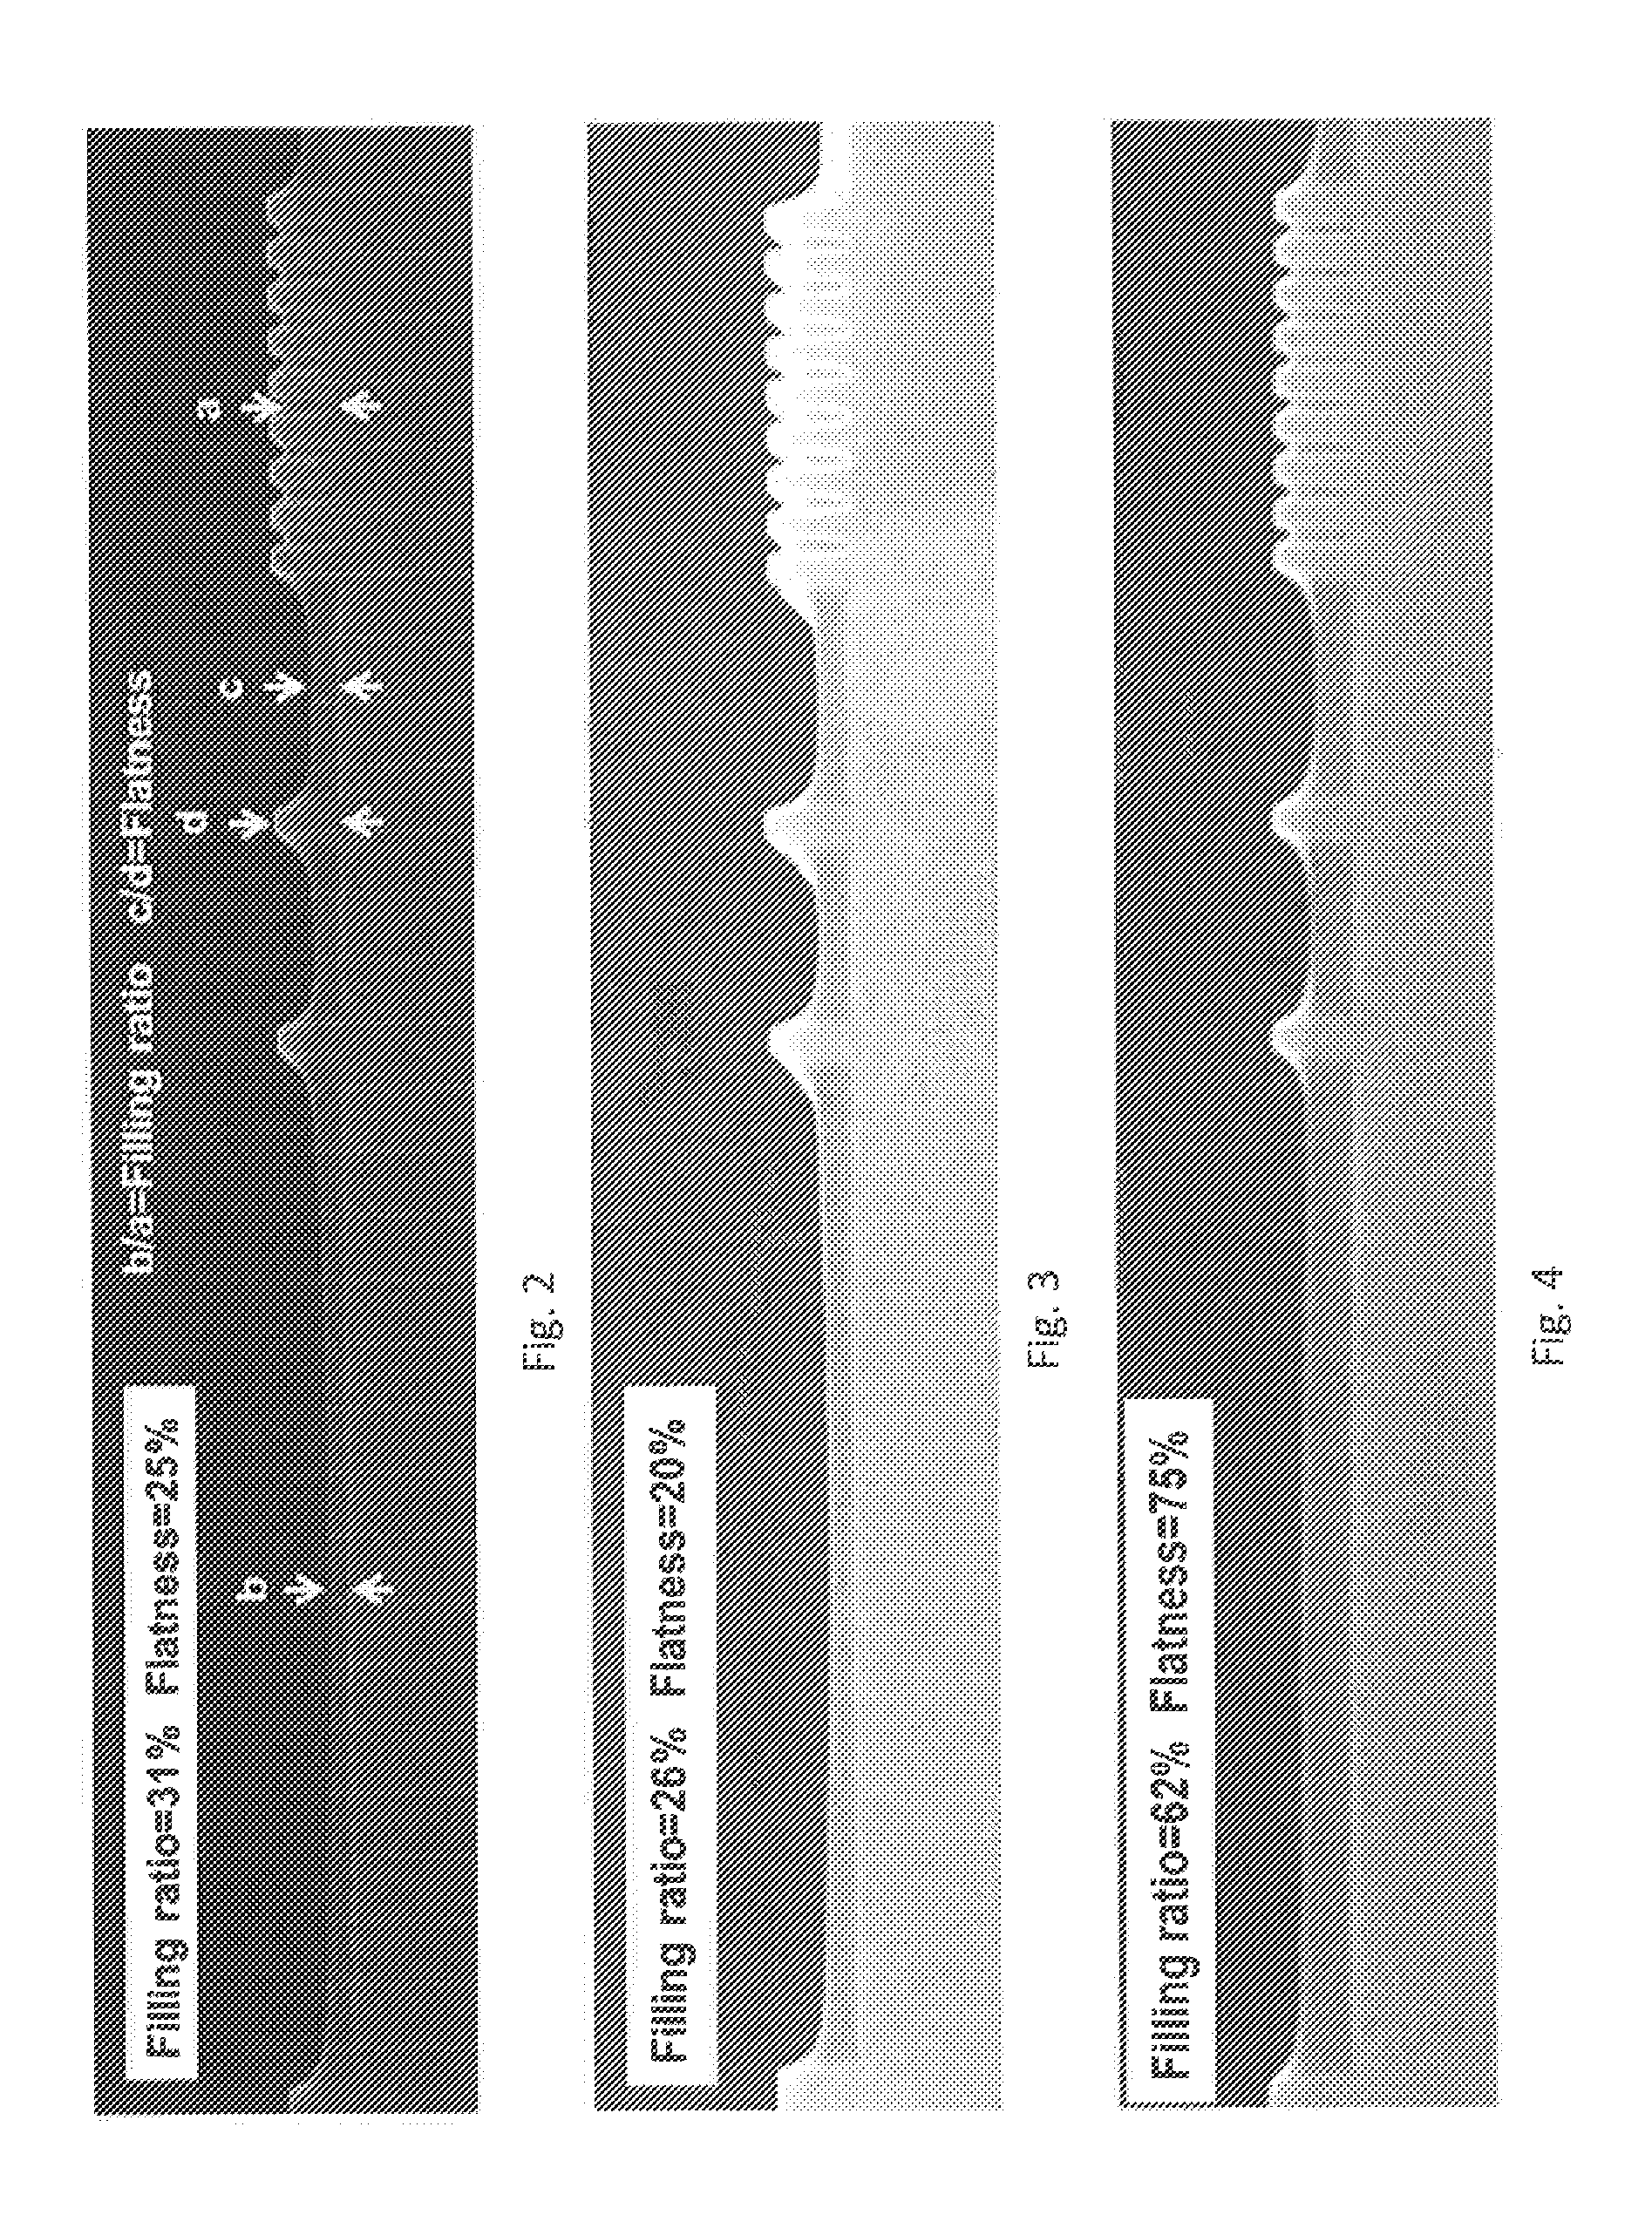 Method For Filling Recesses Using Pre-Treatment With Hydrocarbon-Containing Gas